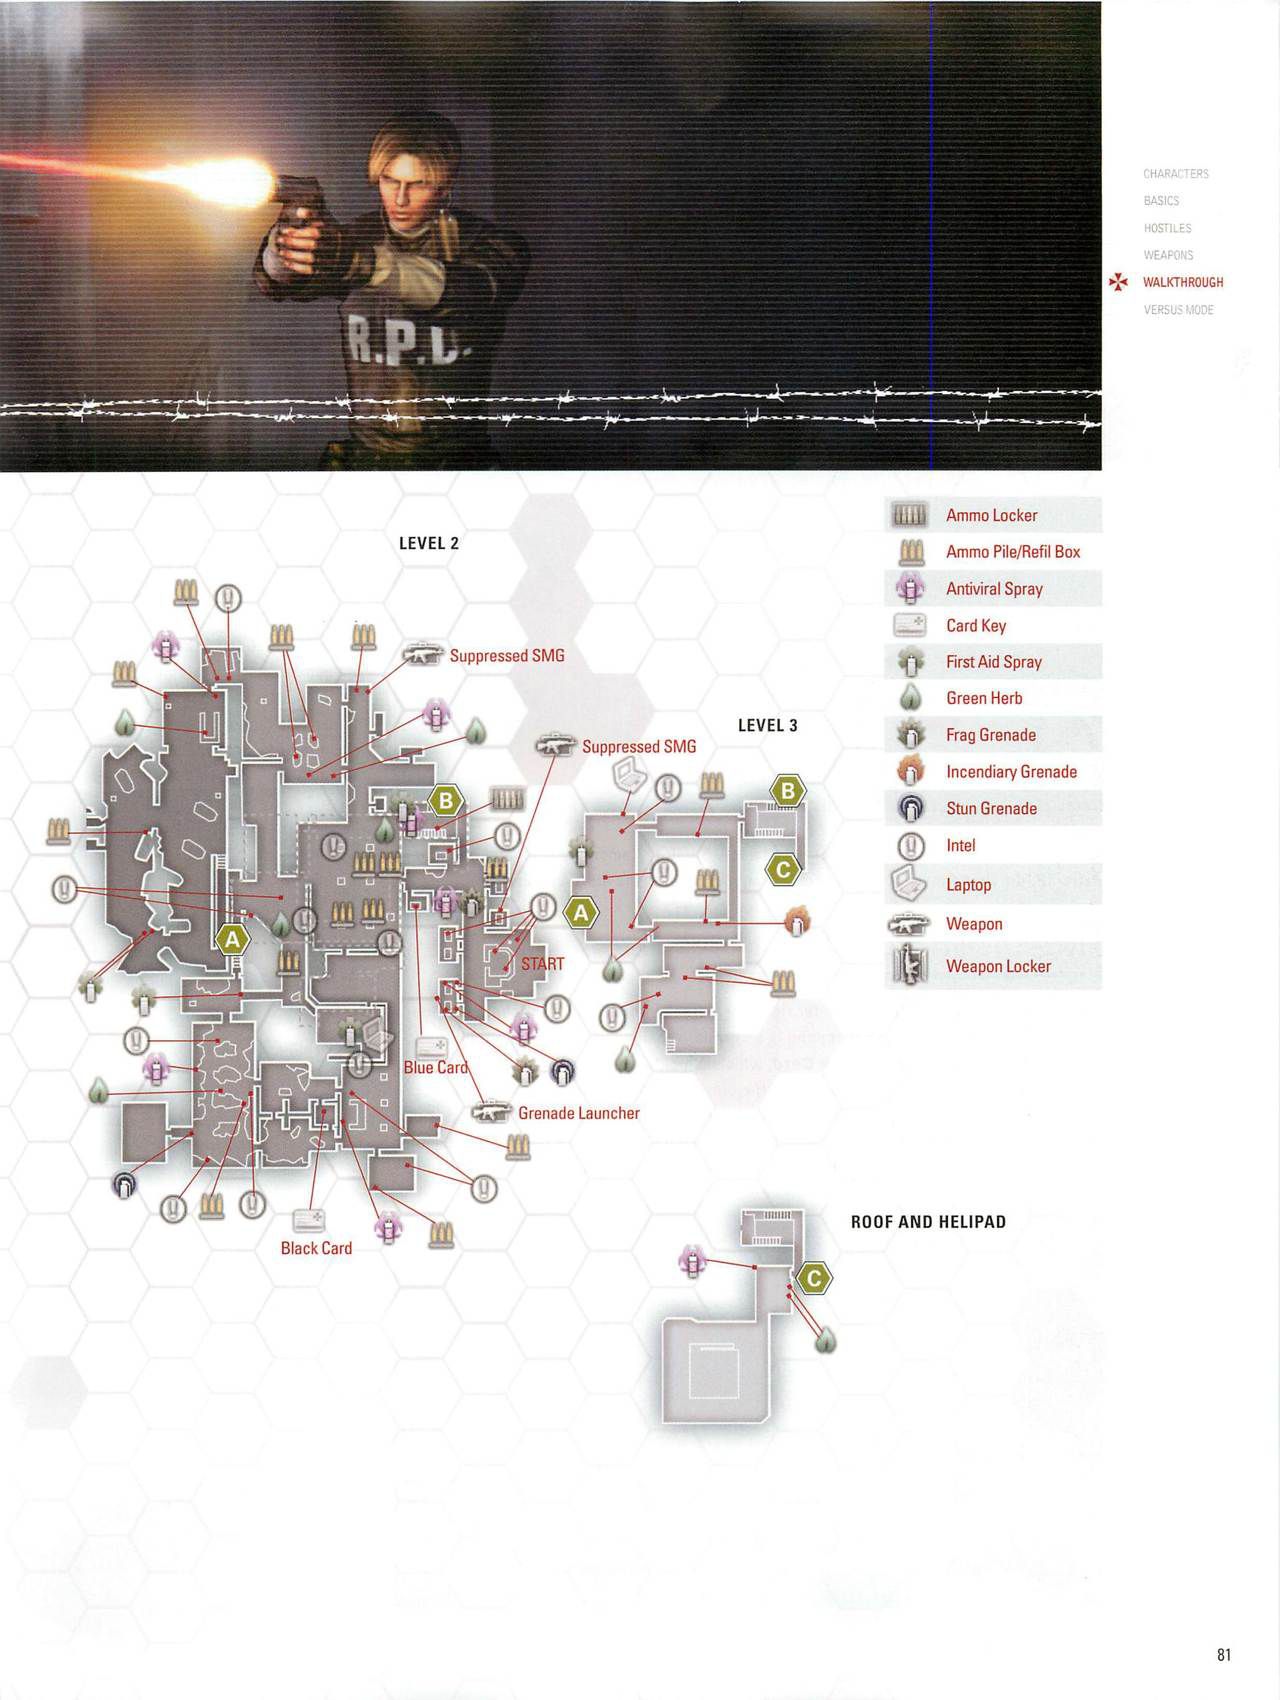 Resident Evil: Operation Raccoon City Official Strategy Guide (watermarked) 83